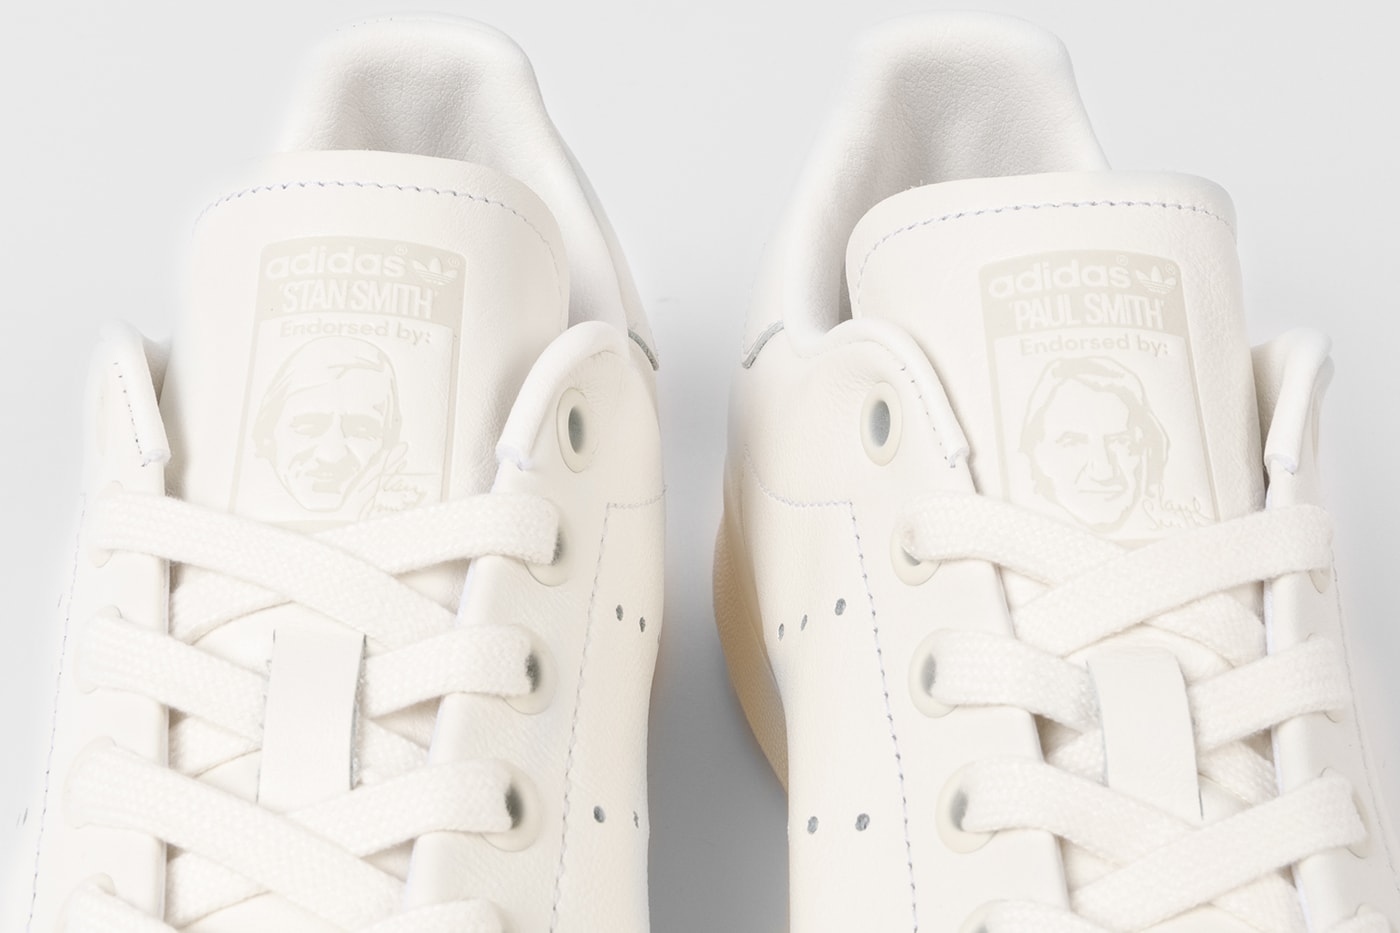 Paul Smith and Stan Smith Share More Than Just a Surname